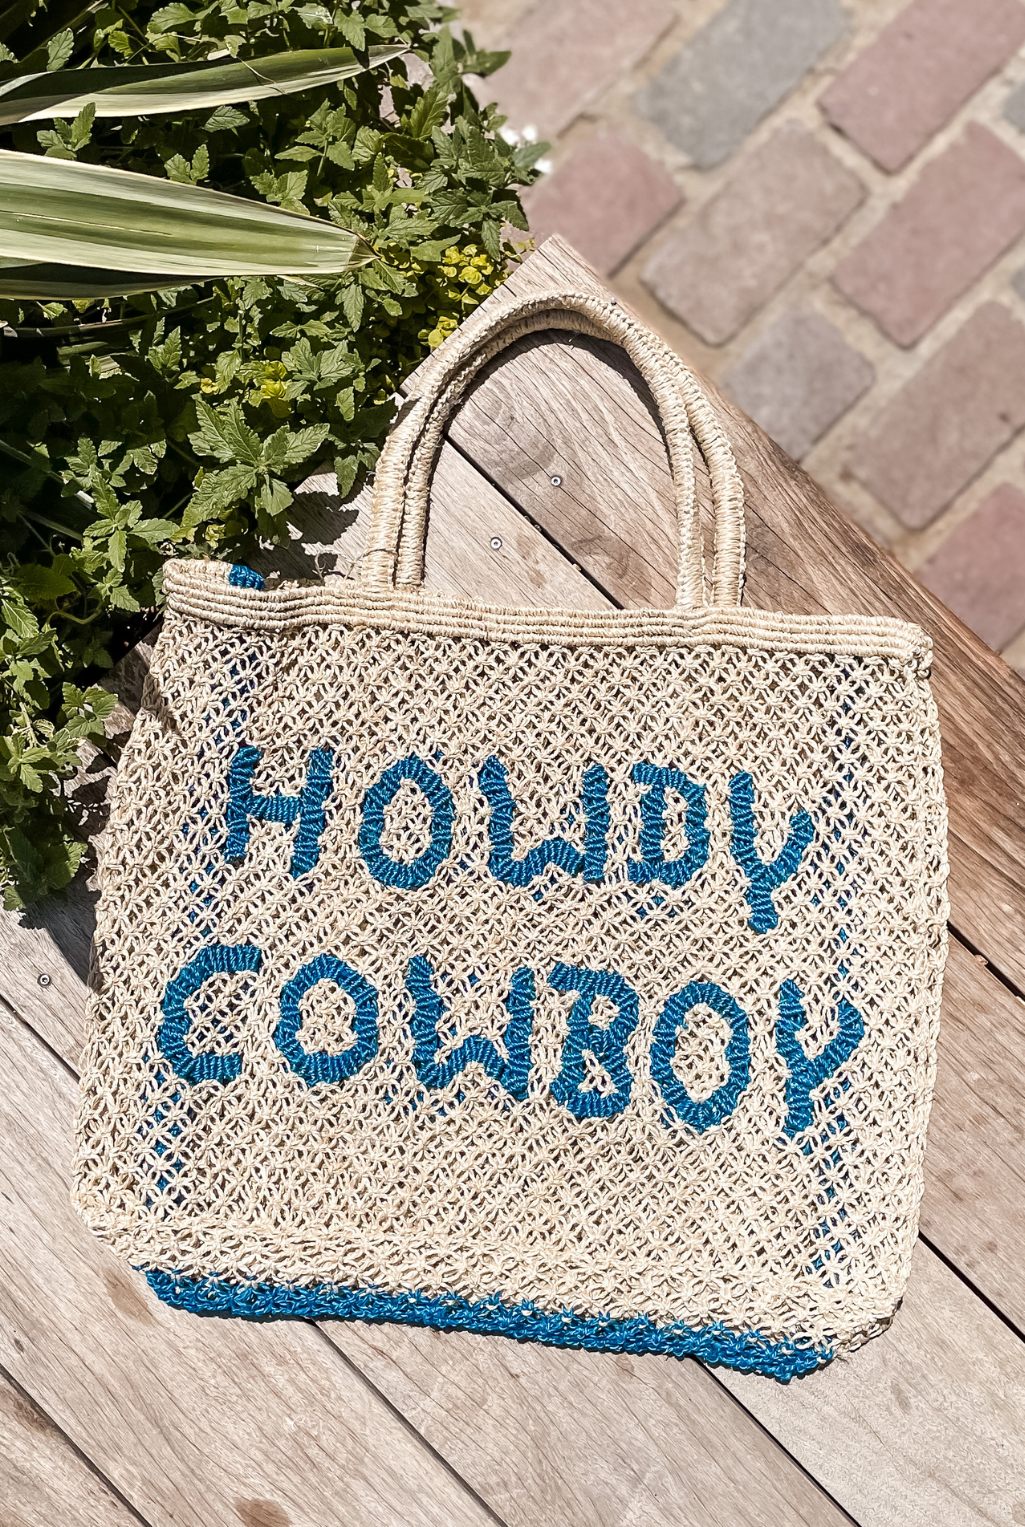 Howdy Tote Bags